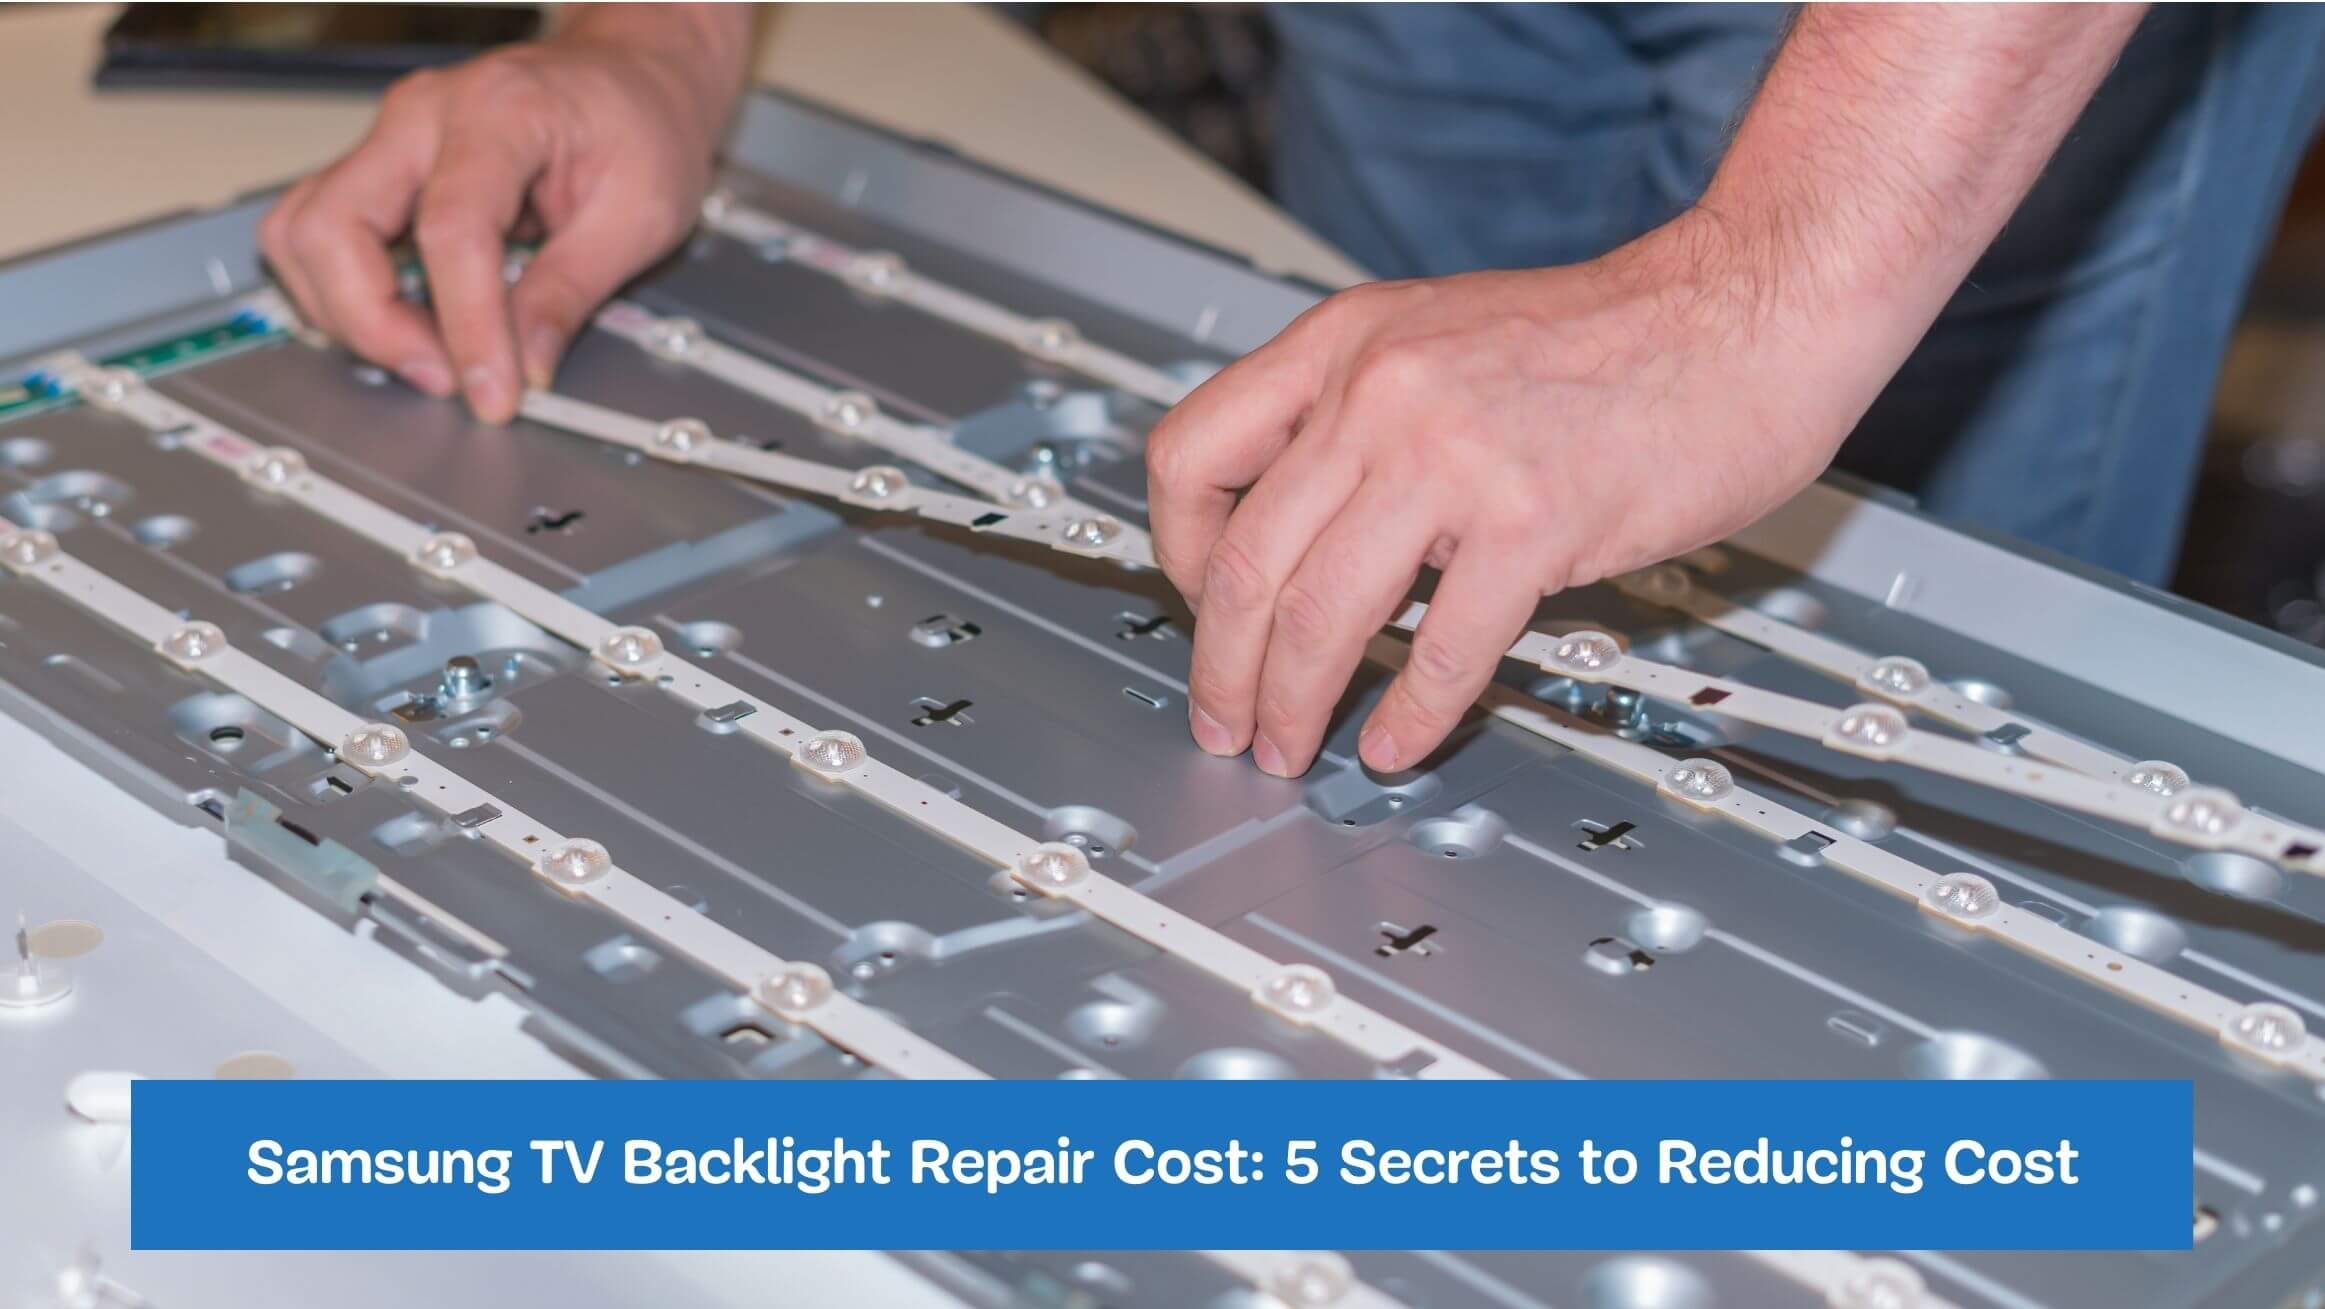 Samsung TV Backlight Repair Cost: 5 Secrets to Reducing Cost